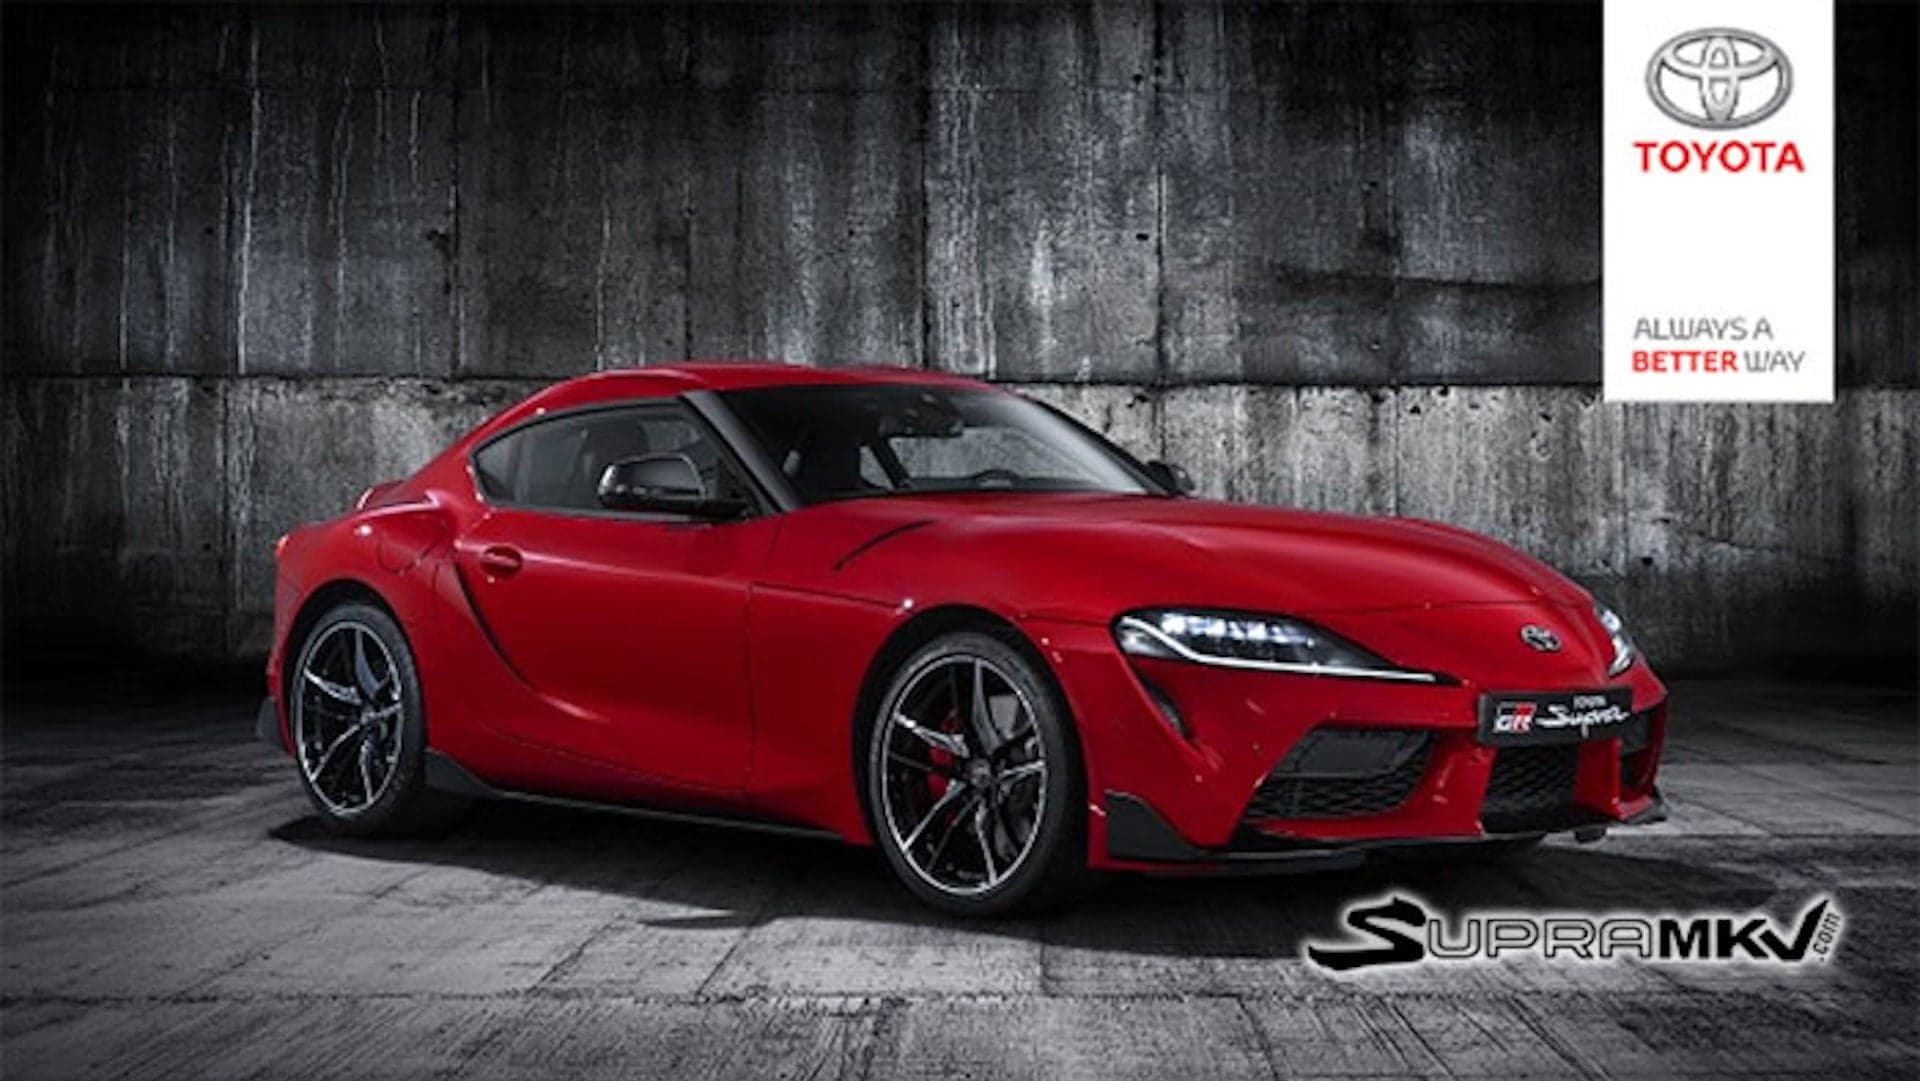 2020 Toyota Supra Images Leaked Courtesy of an Official Company Email